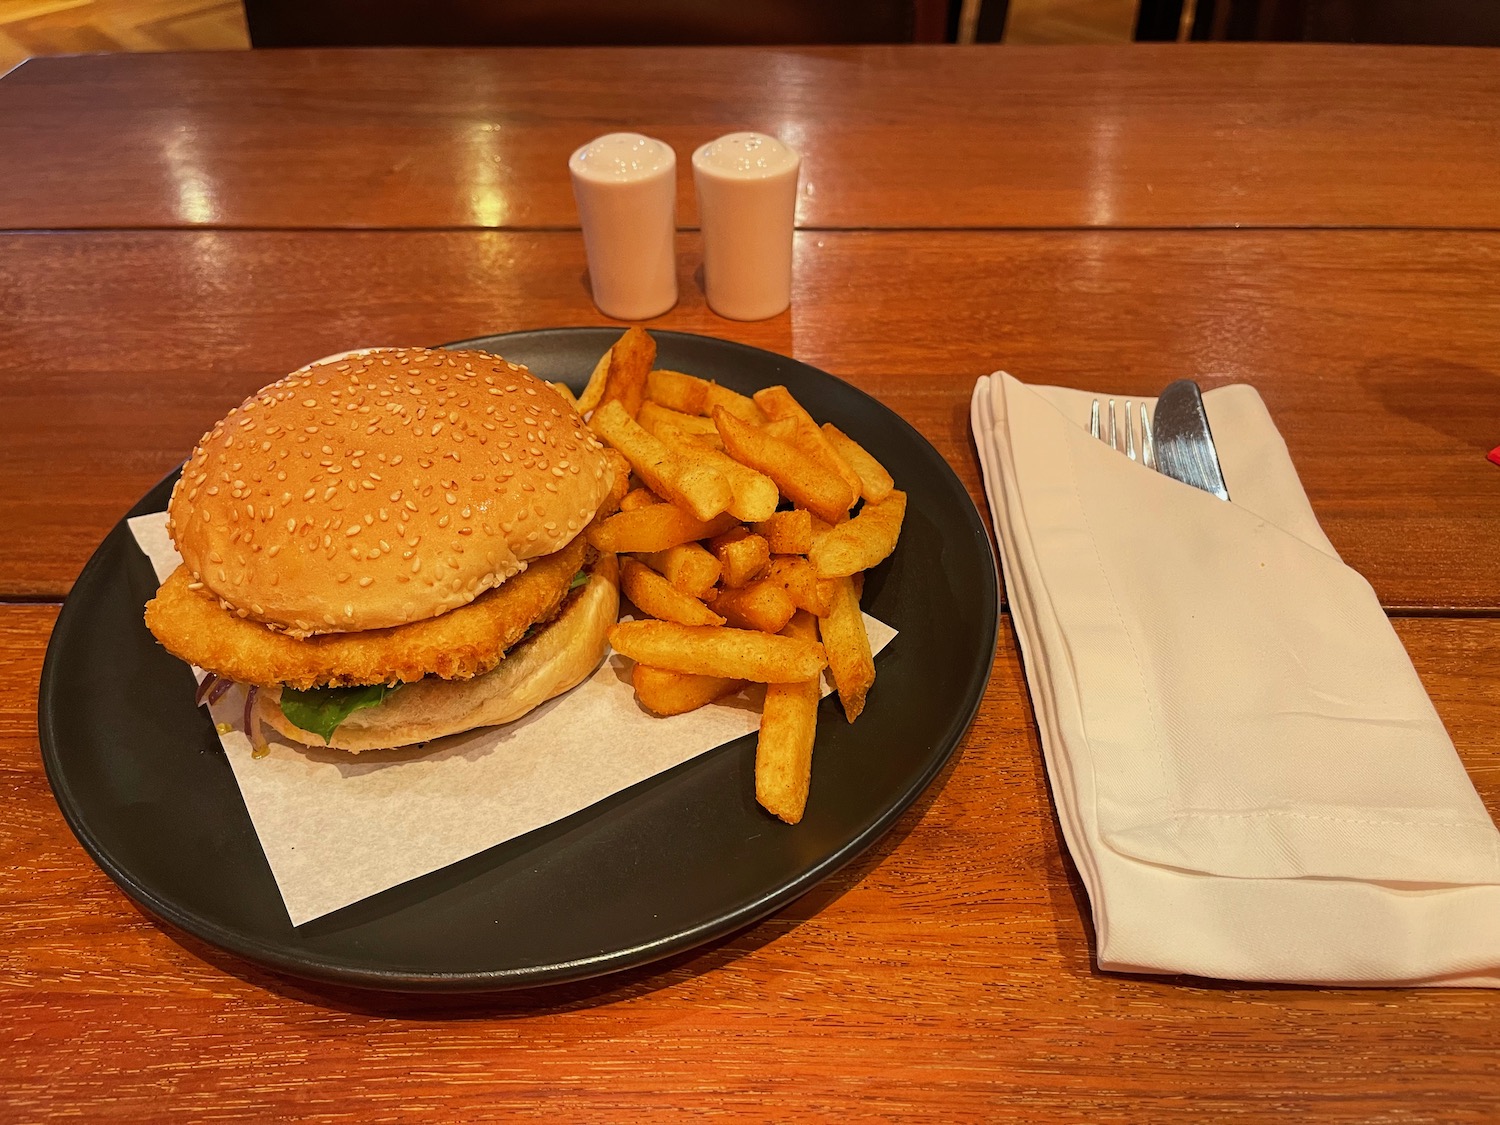 a burger and fries on a plate